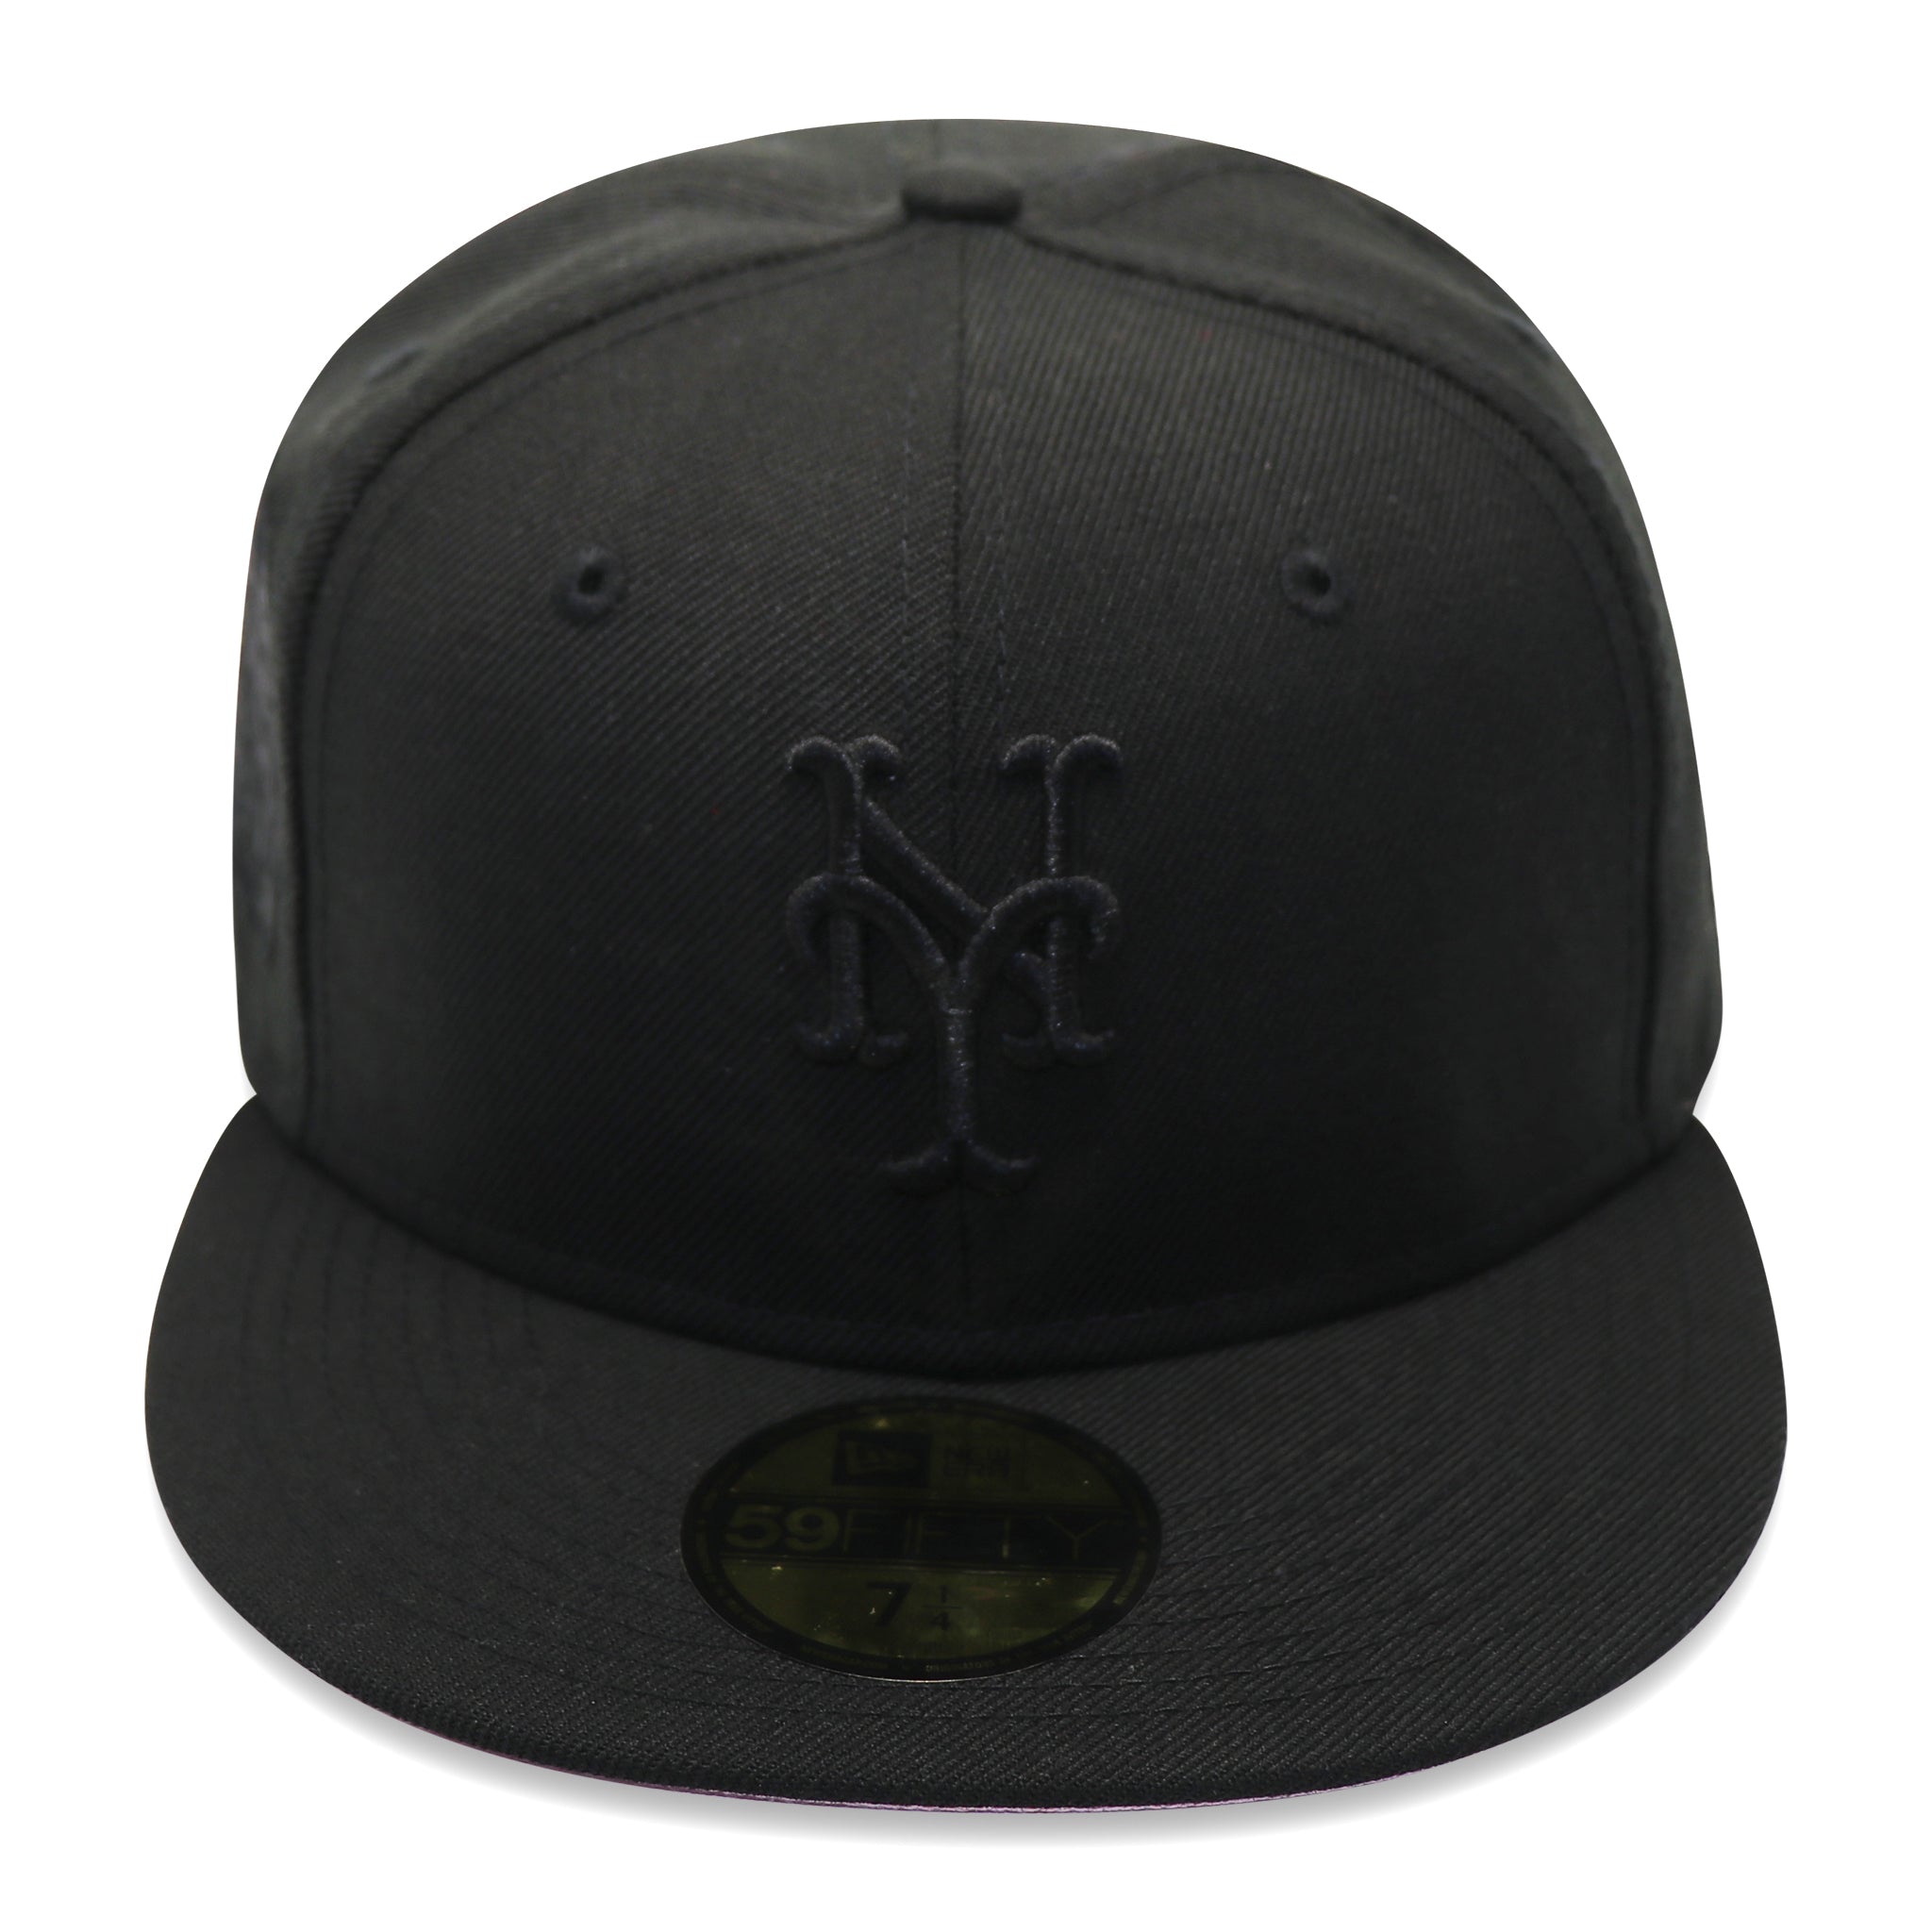 NEW YORK METS (2000 SUBWAY SERIES "BLACKOUT SERIES") NEW ERA 59FIFTY FITTED (PINK BOTTOM)